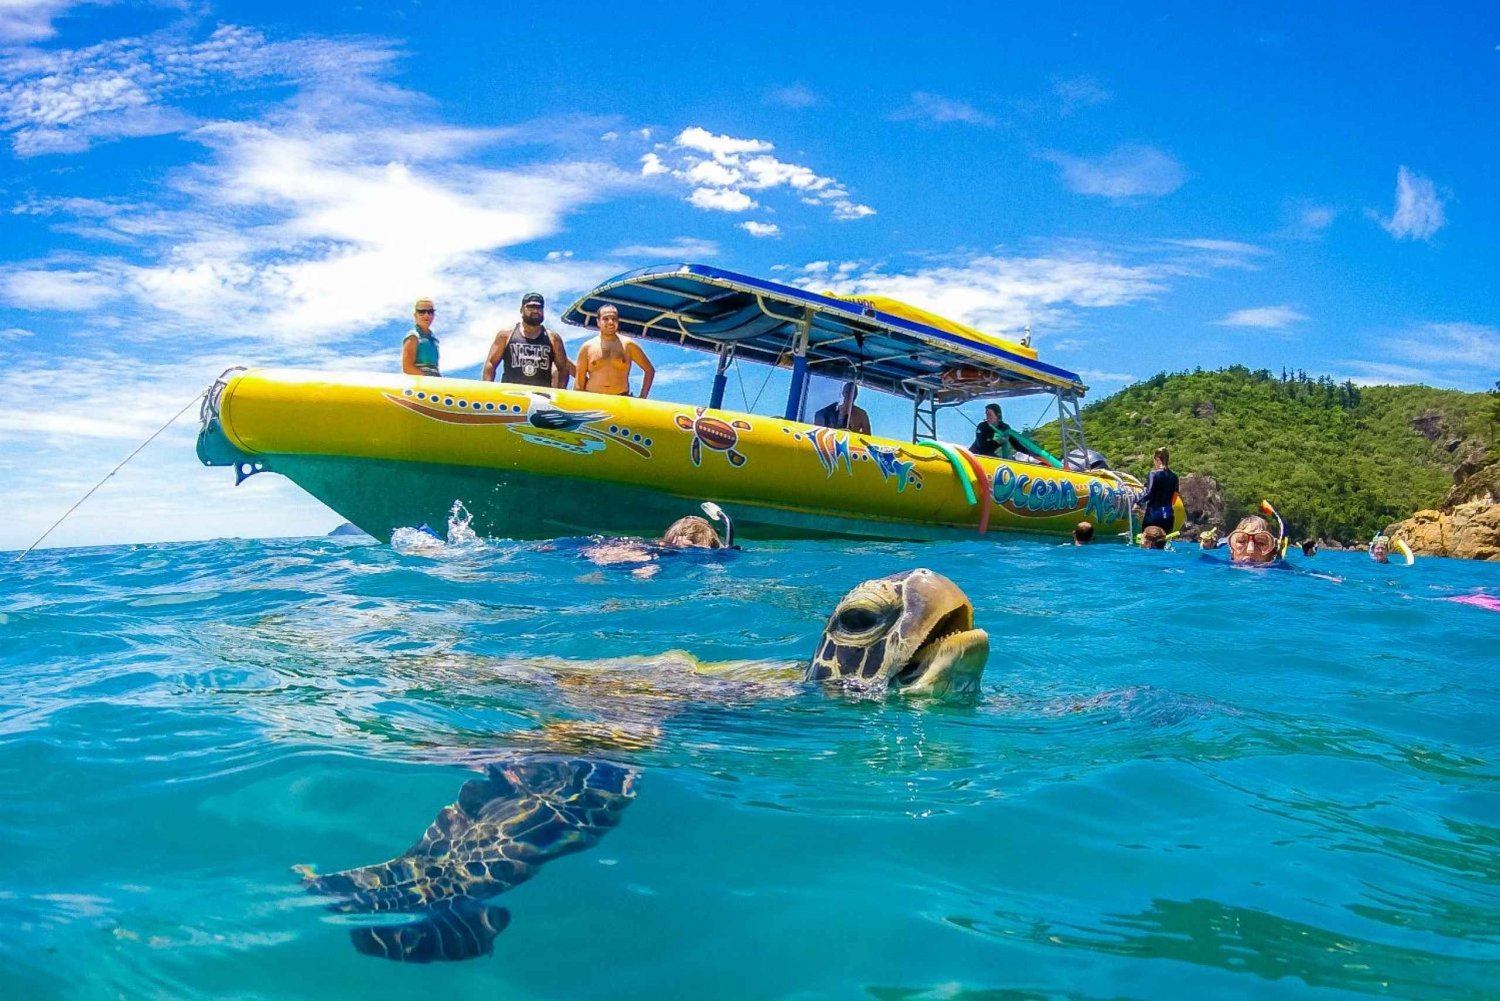 Whitsundays: Ocean Rafting Fly Raft Tour with Snorkeling